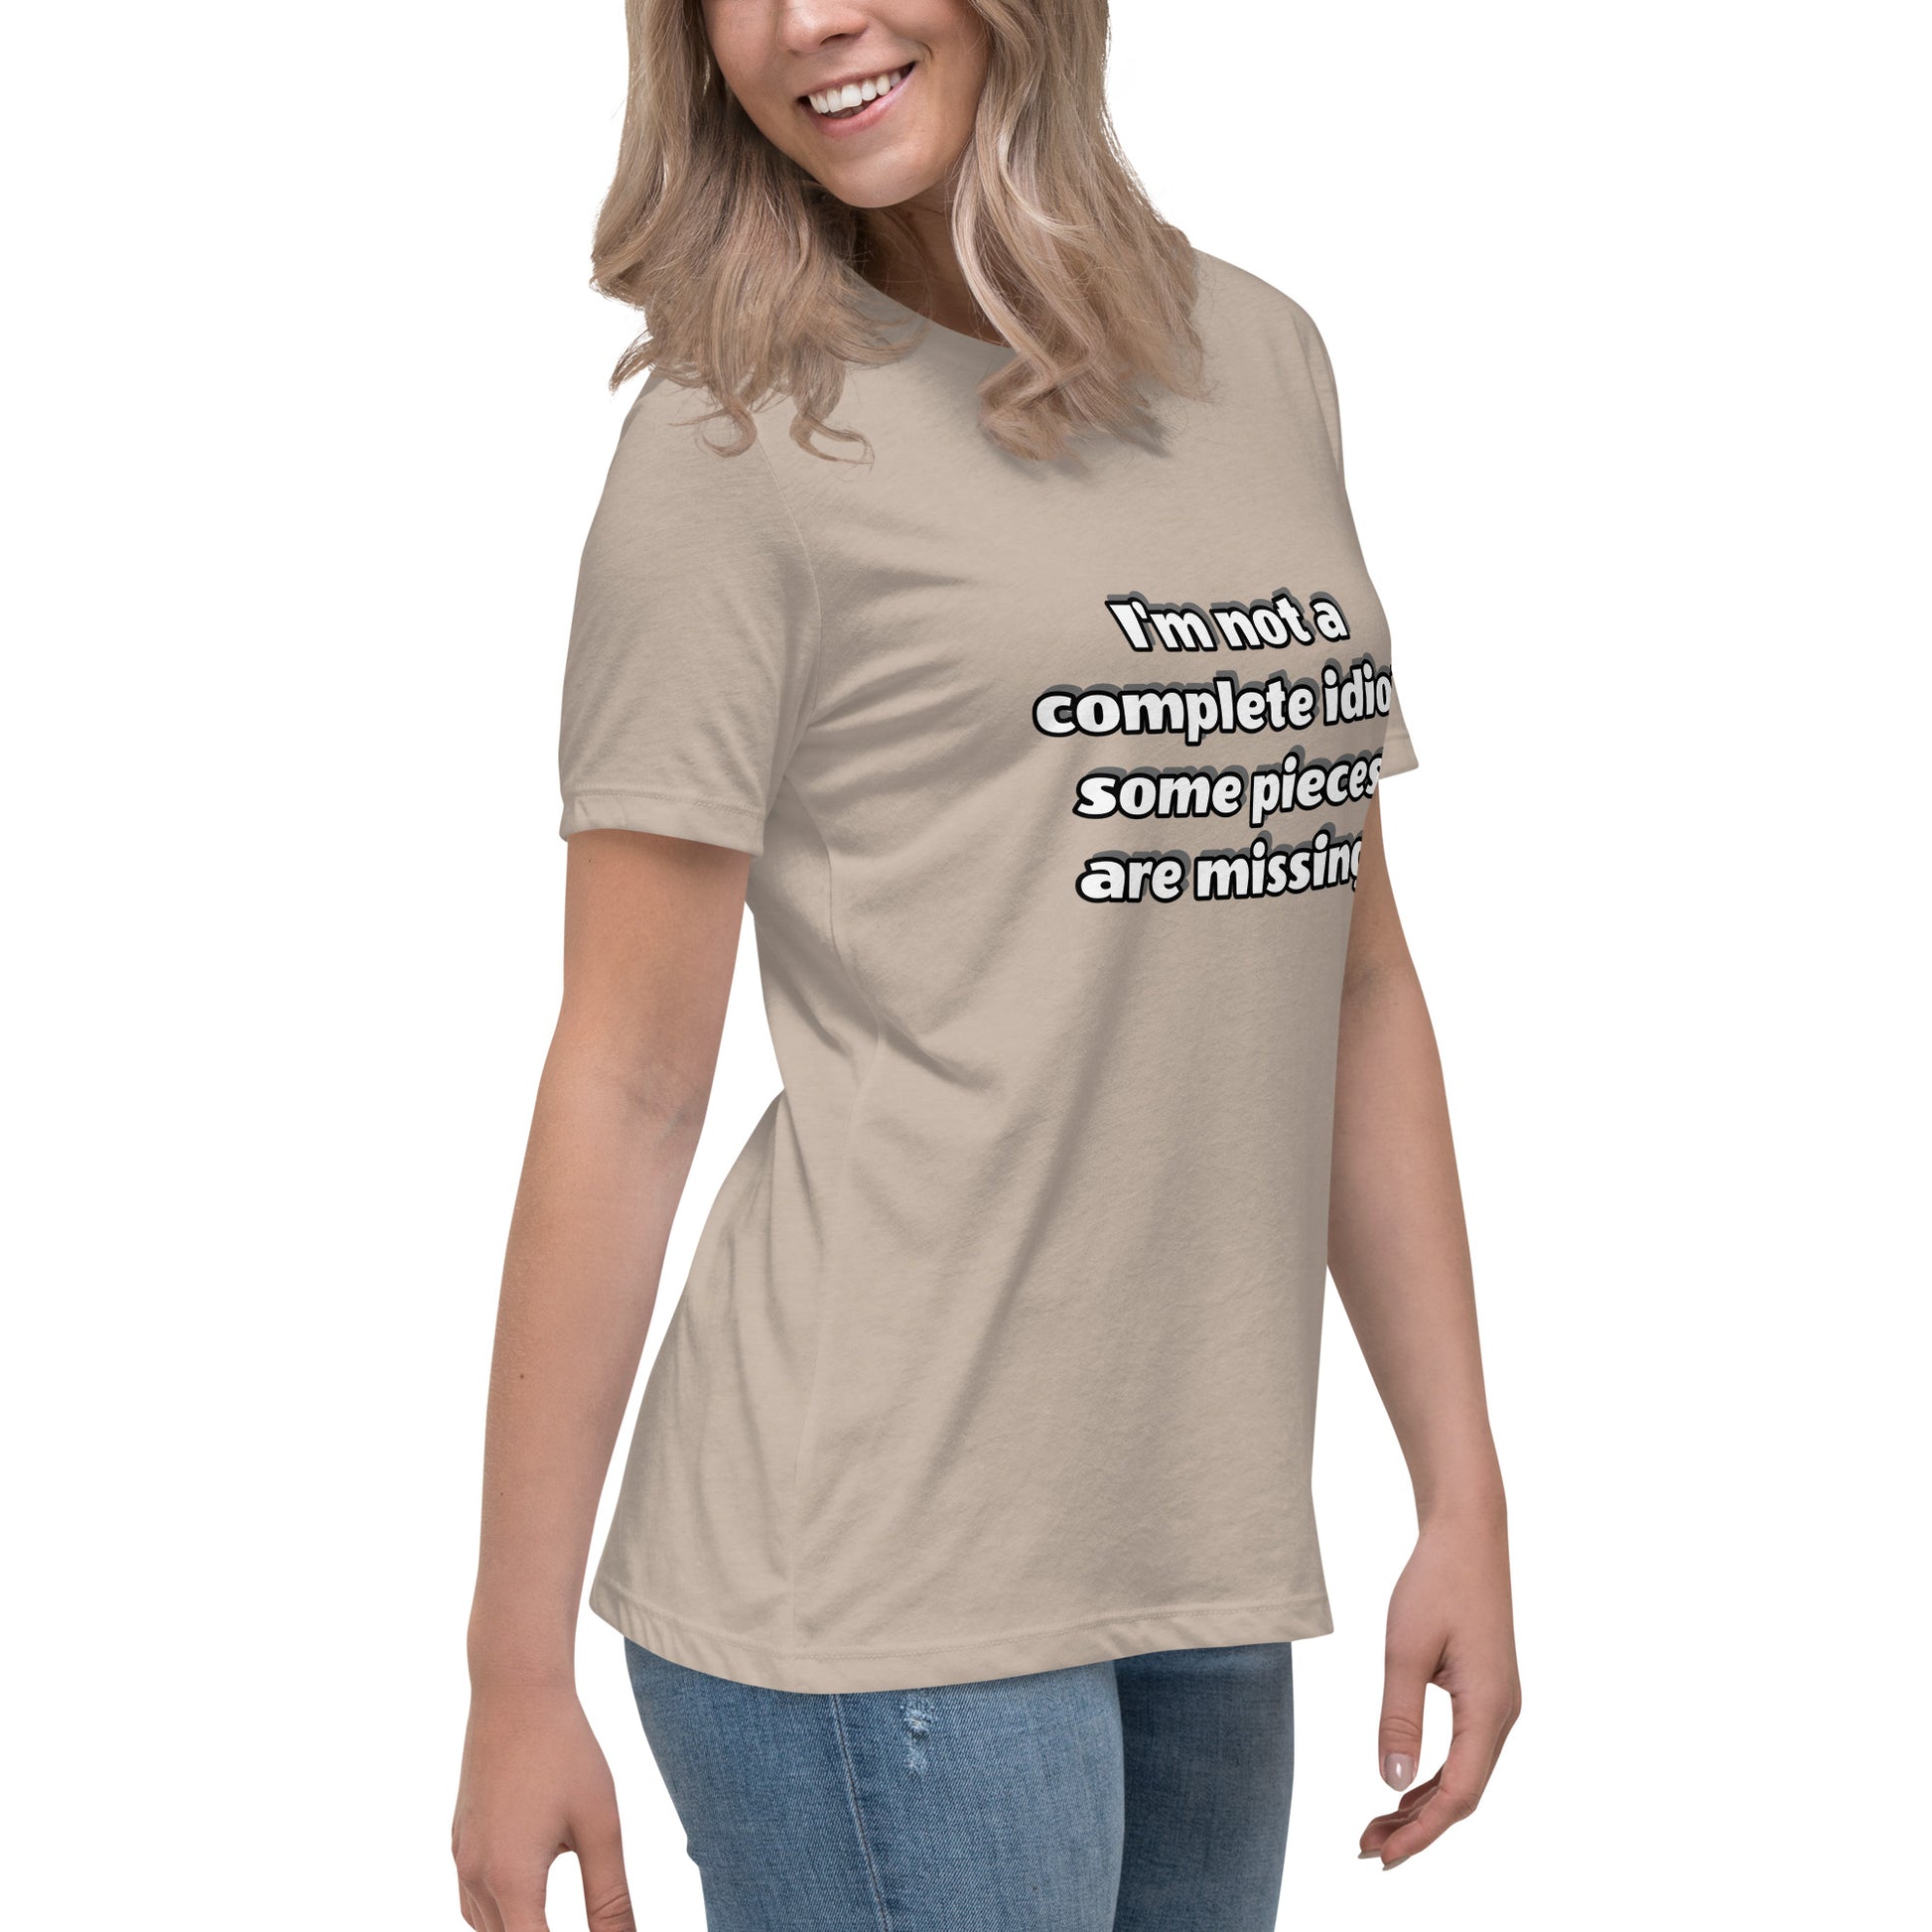 Women with stone t-shirt with text “I’m not a complete idiot, some pieces are missing”